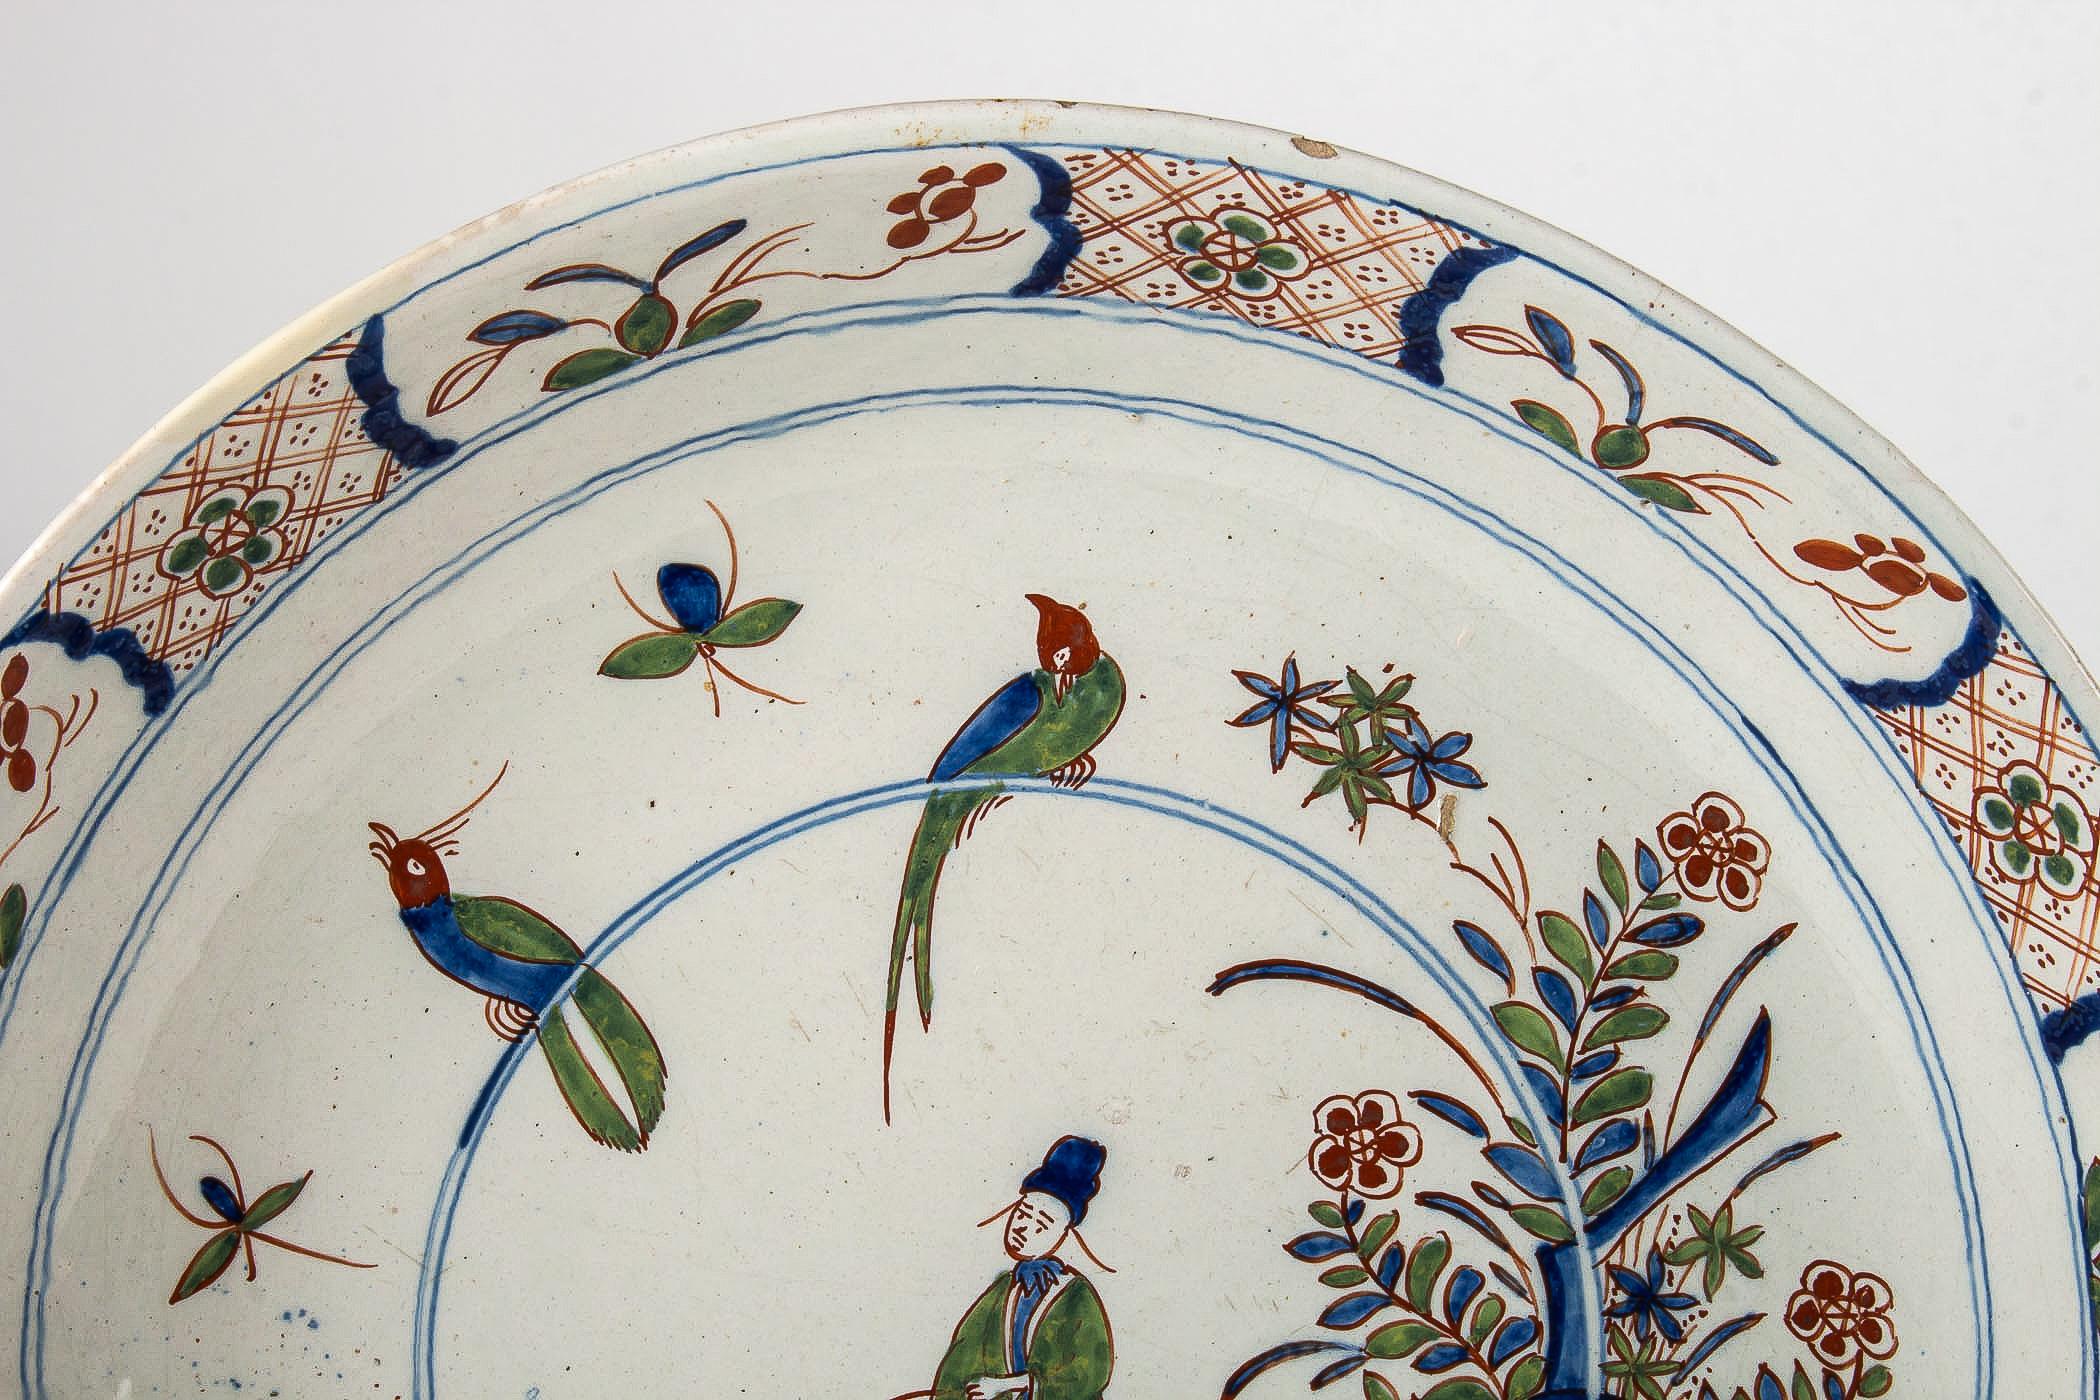 Chinoiserie Mid-18th Century, Large Faience Delft Round Dish, circa 1720-1750